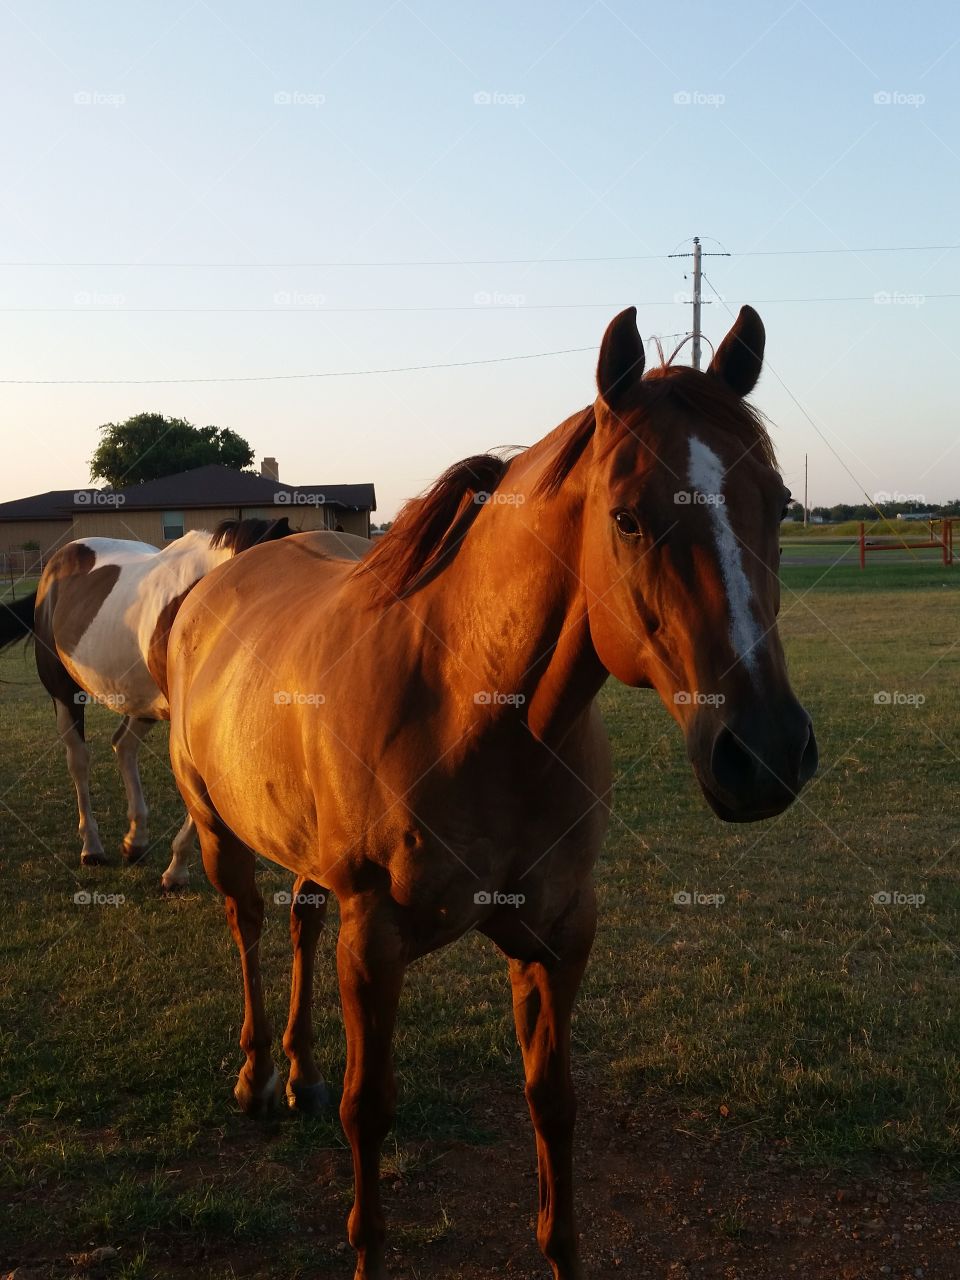 Hey Horses!. The horses were following us to the barn right before sundown. Super friendly! Pic taken in Oklahoma.